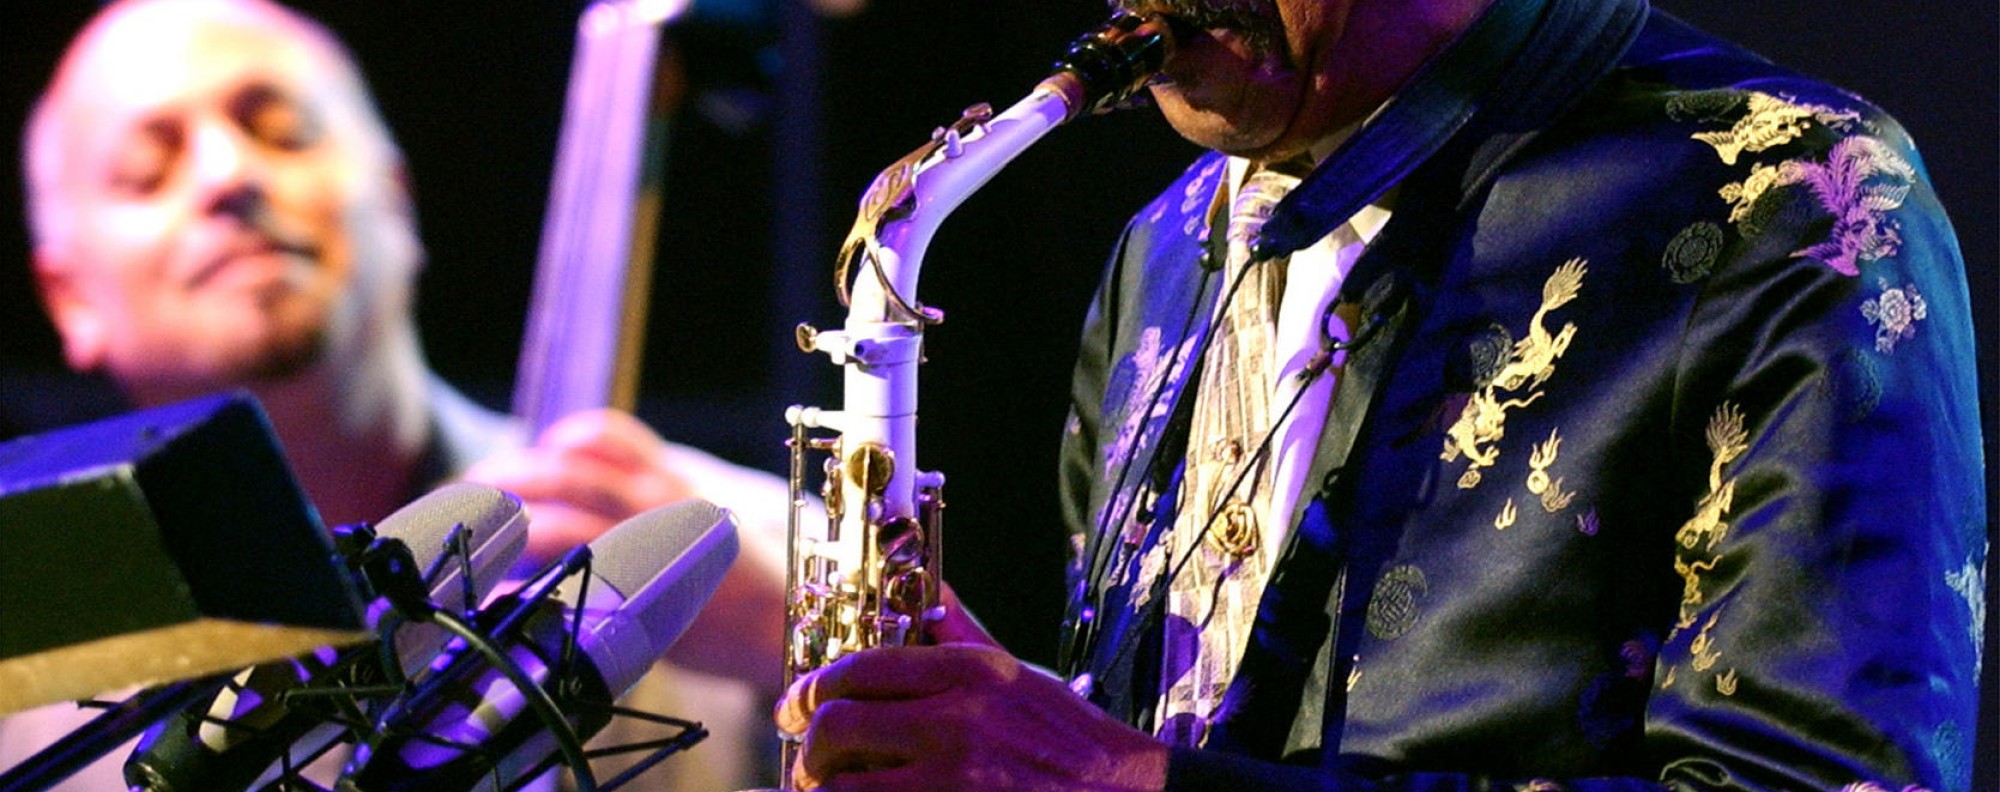 Ornette Coleman, free jazz pioneer who stuck to his principles